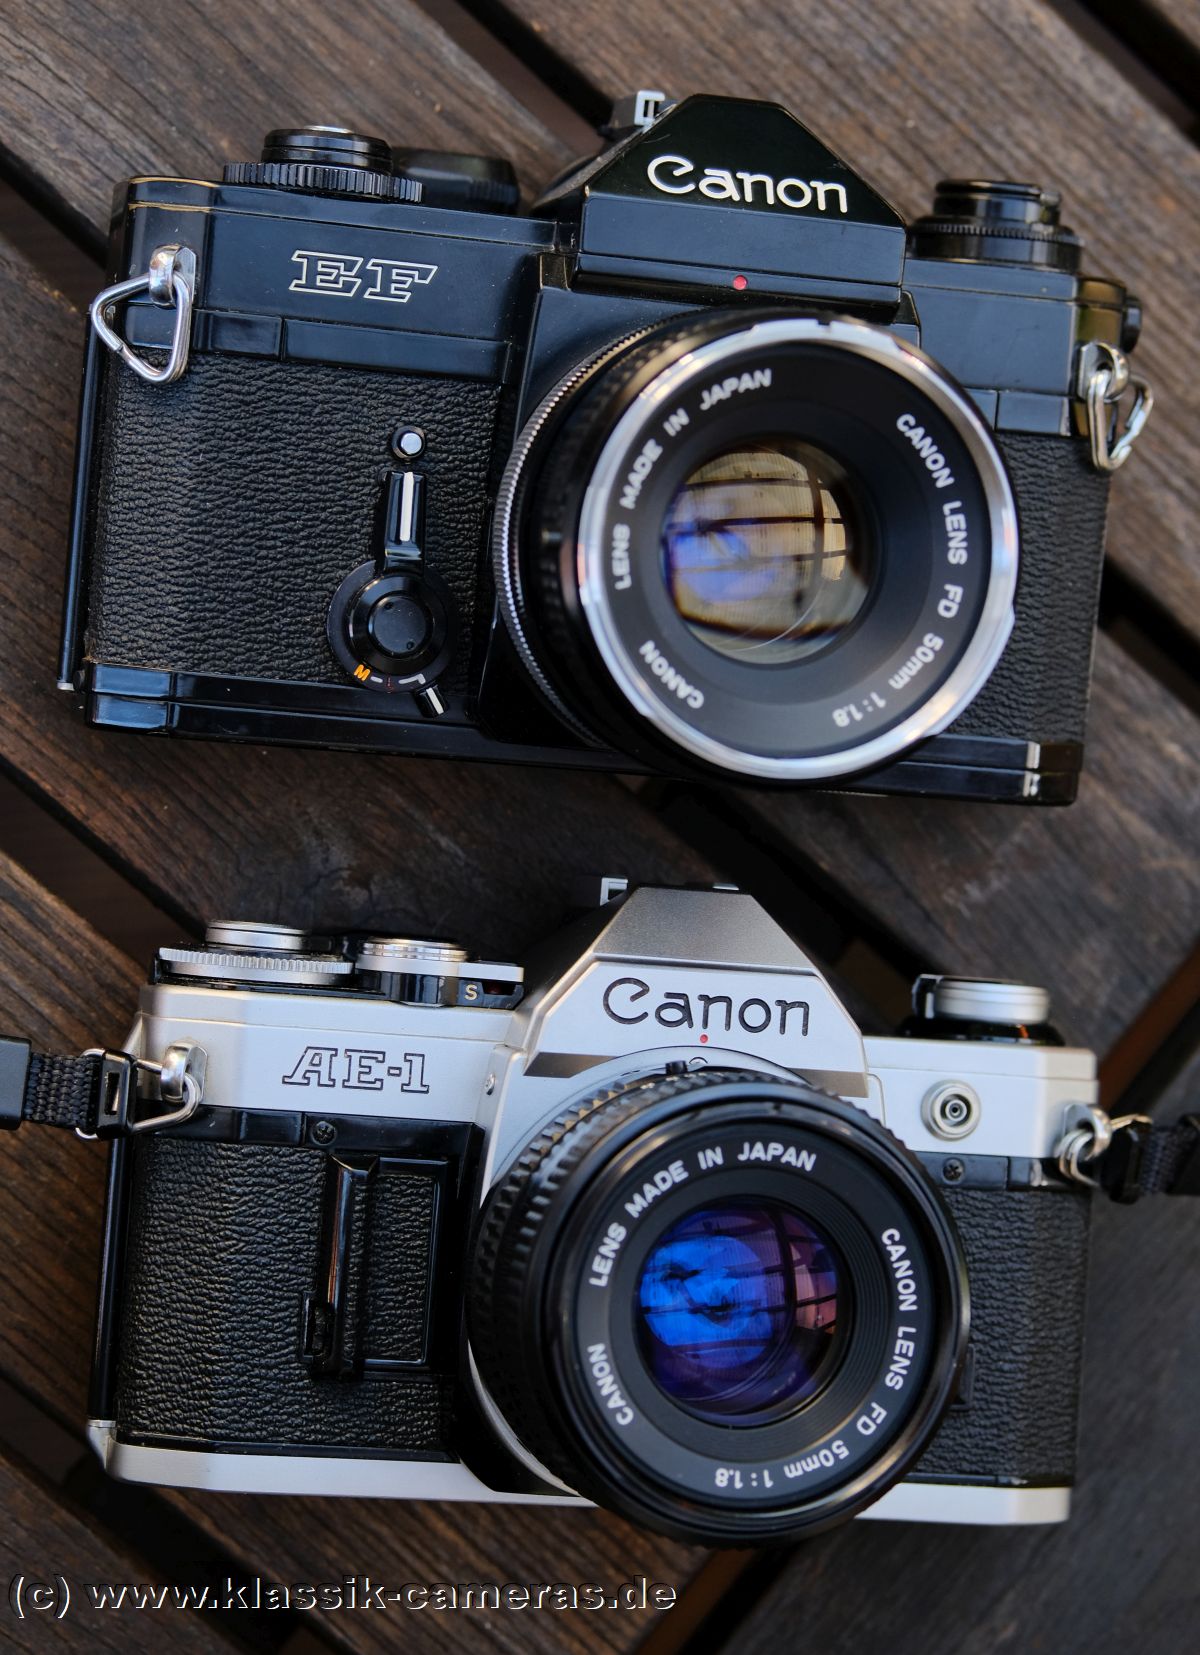 Canon EF and AE-1